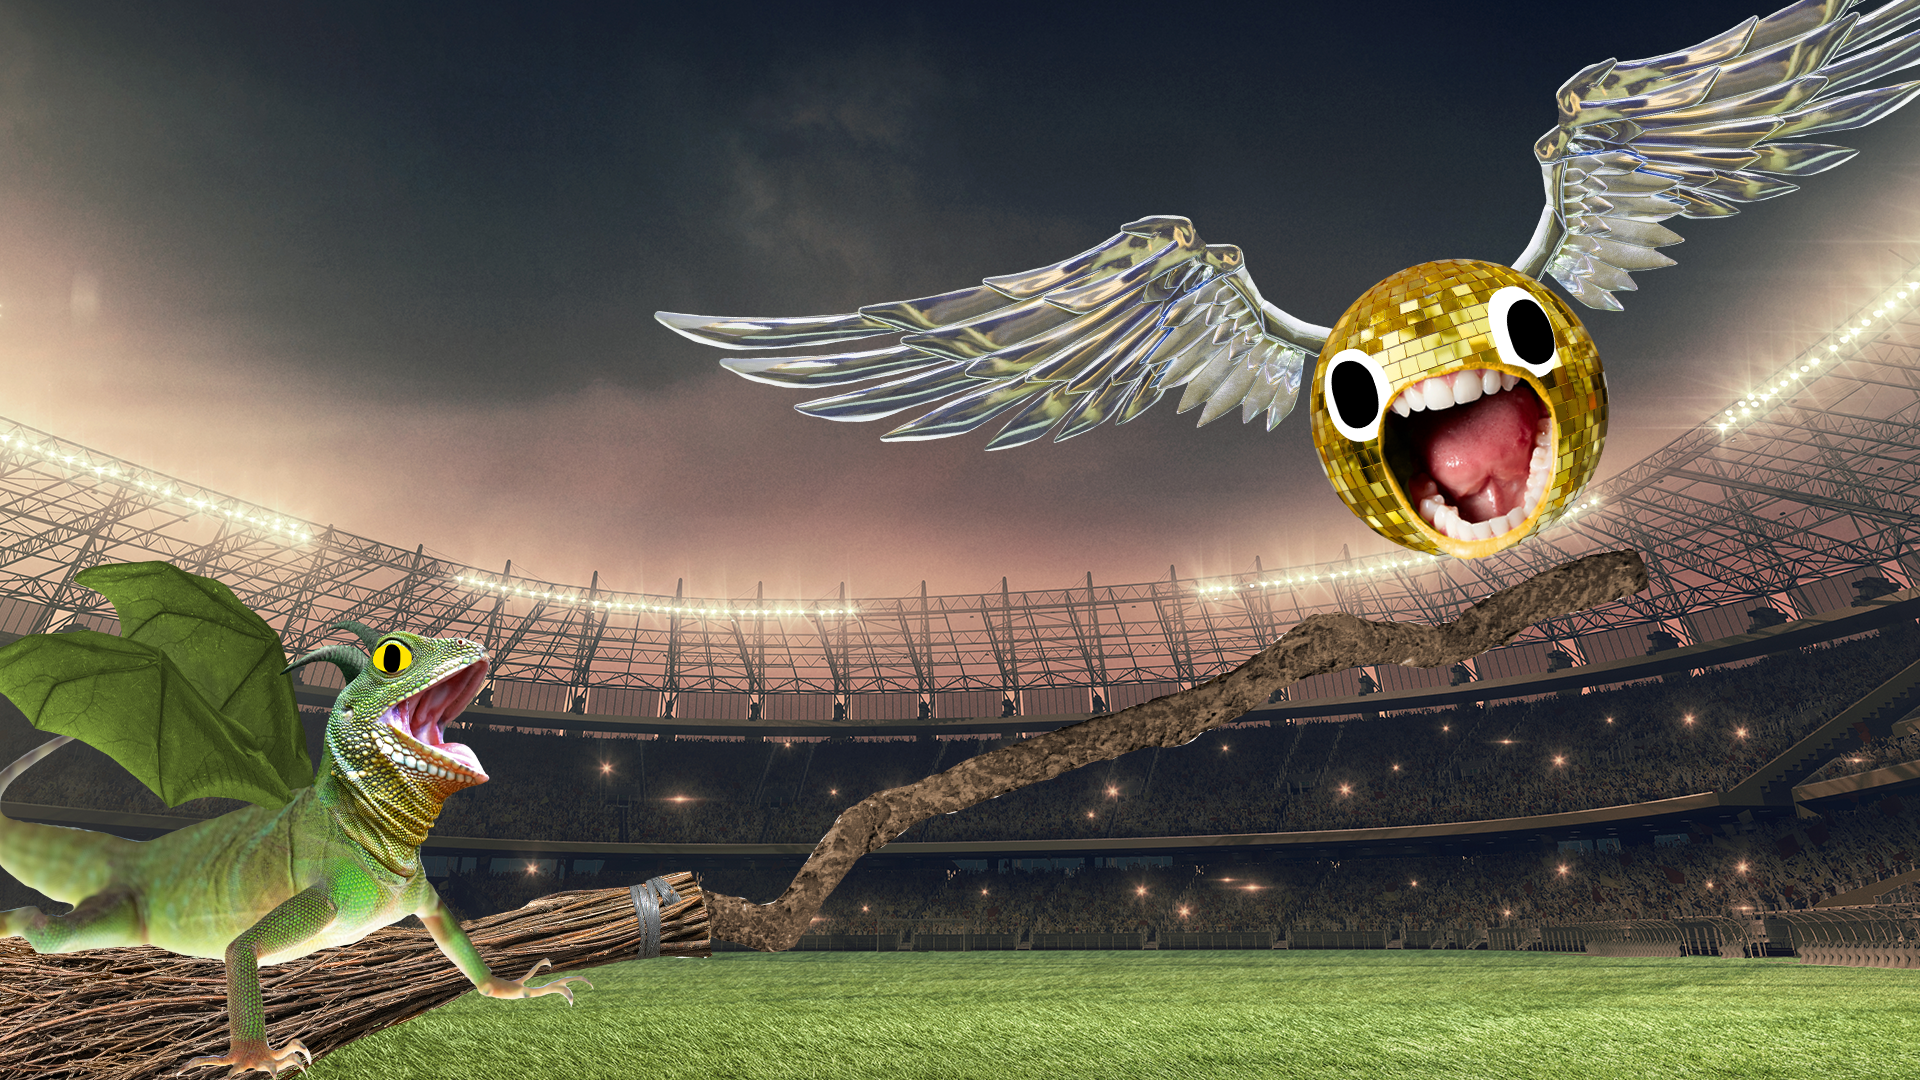 Dragon and screaming snitch in stadium